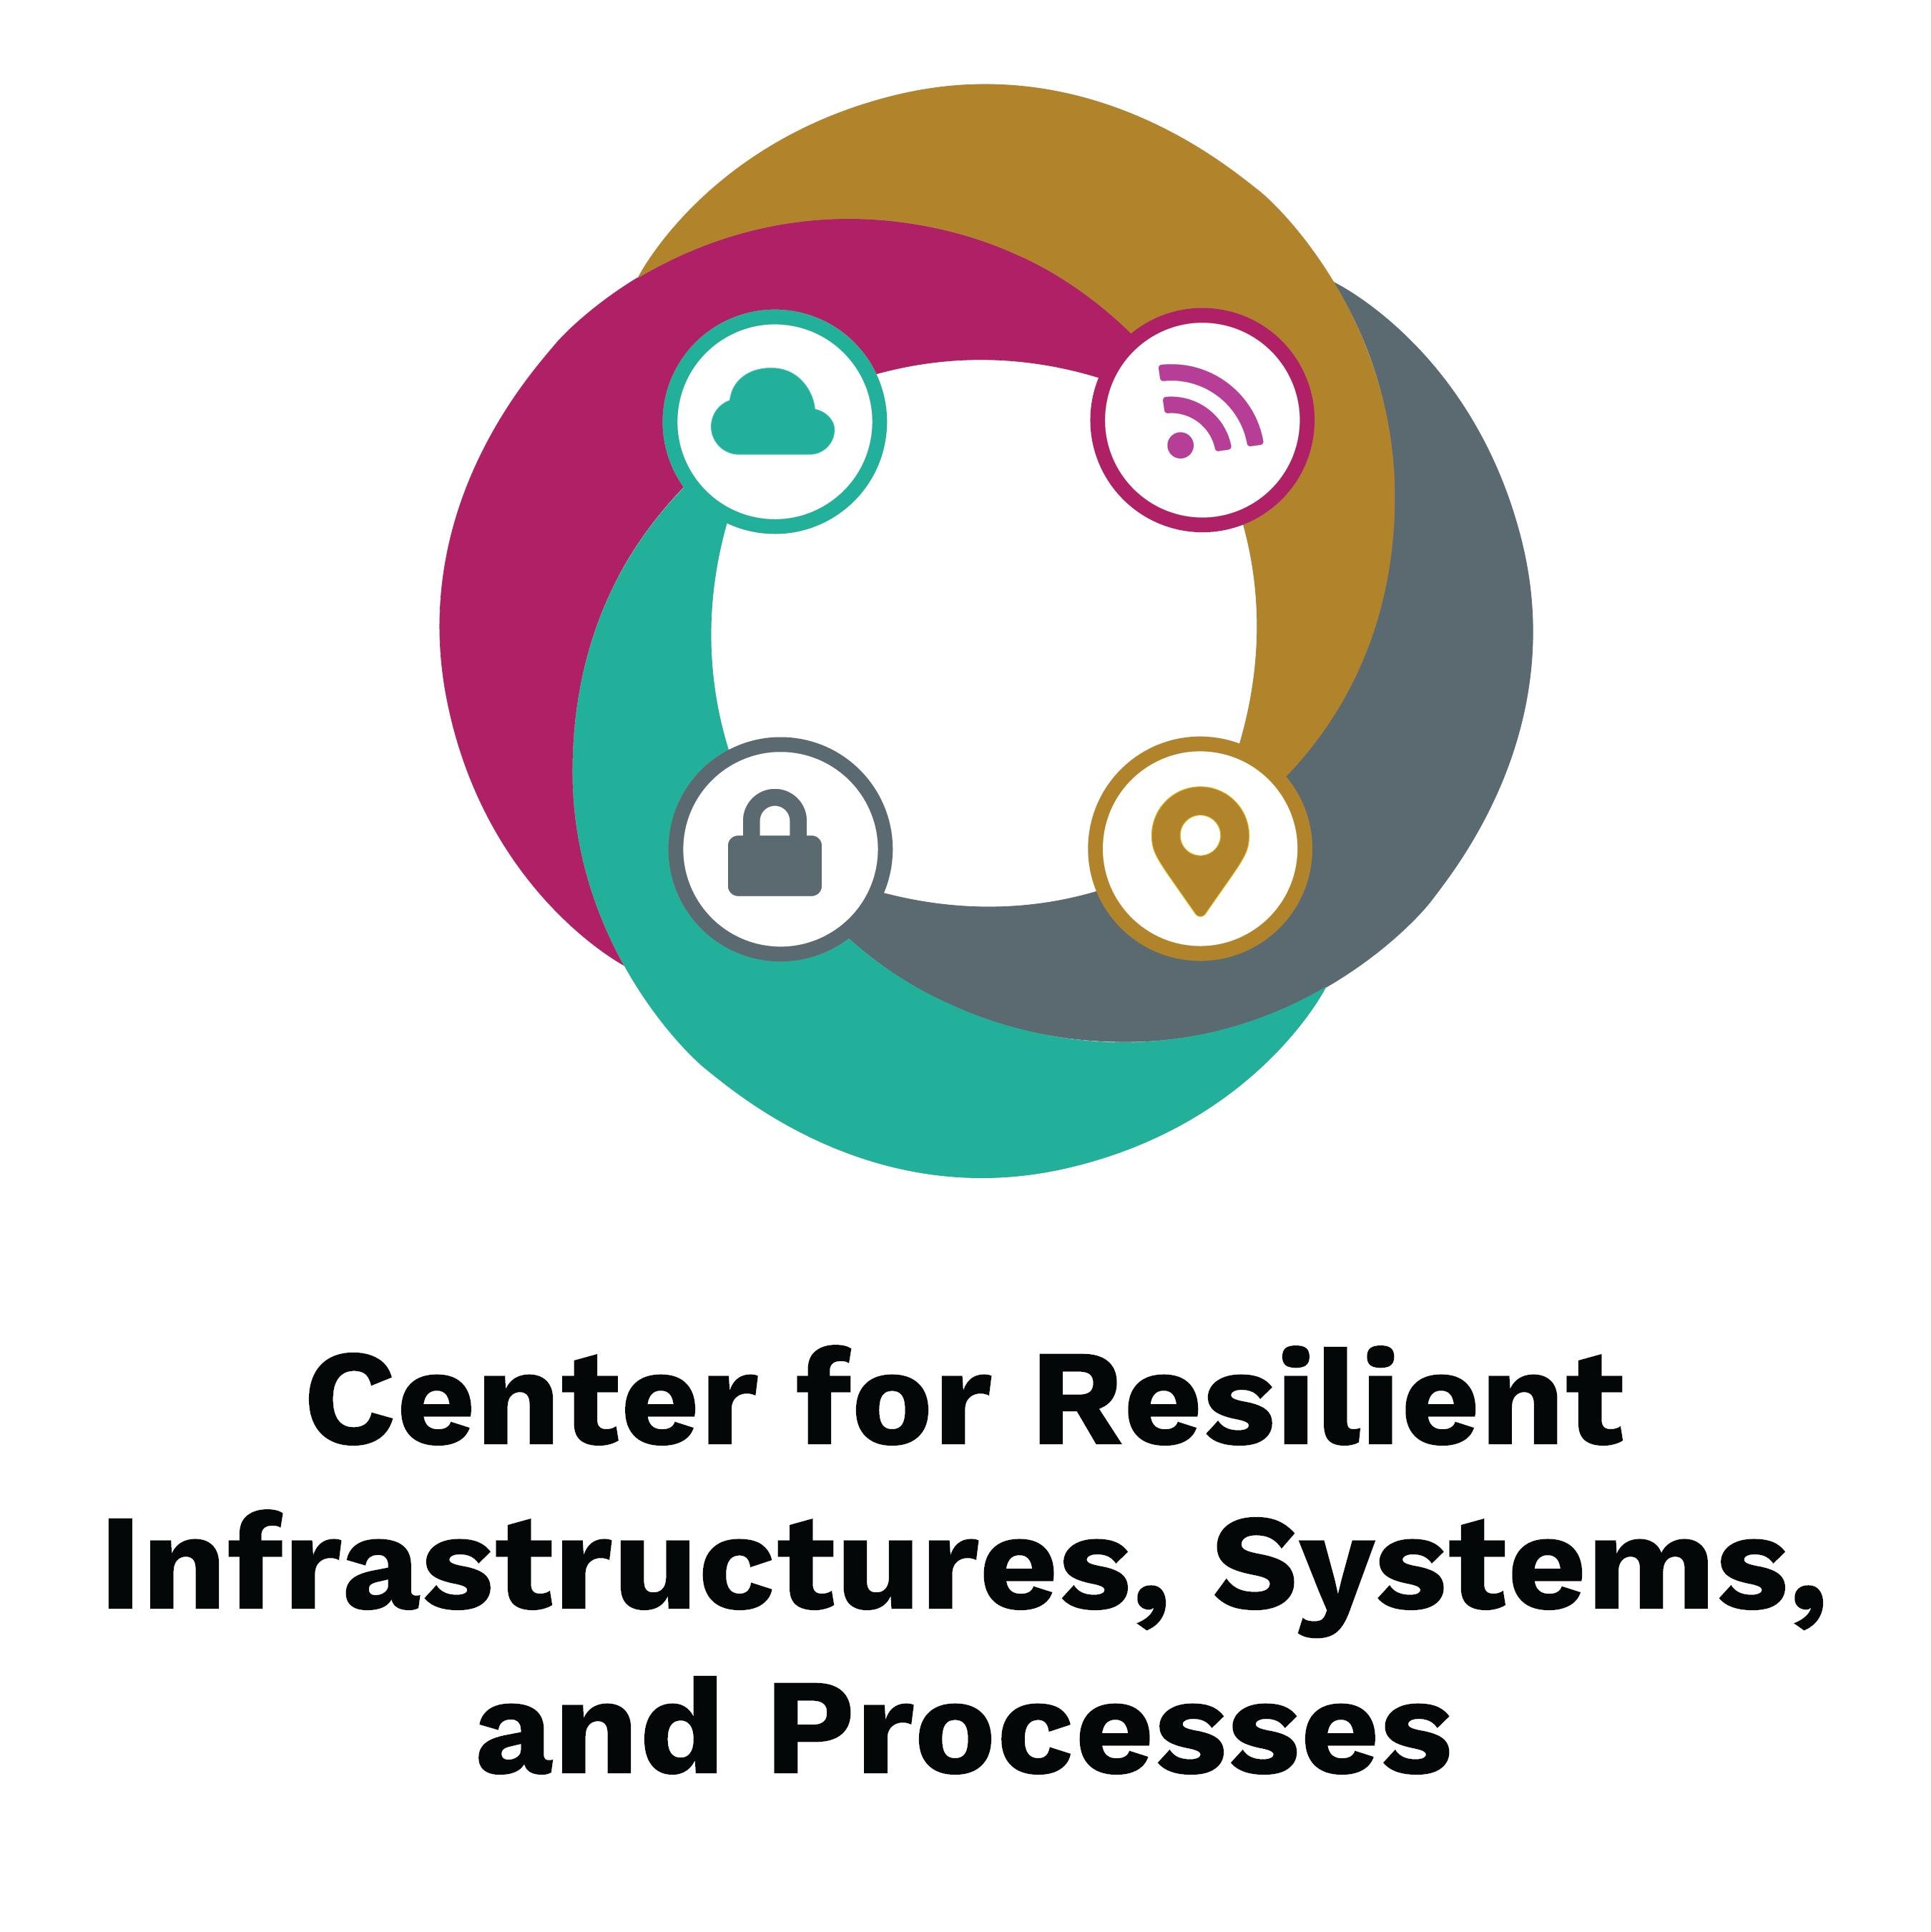 CRISP is a multi-disciplinary center at Purdue University, started in Oct 2017, focusing on 3 themes in resilience: cyber, cyber-physical, and socio-technical.